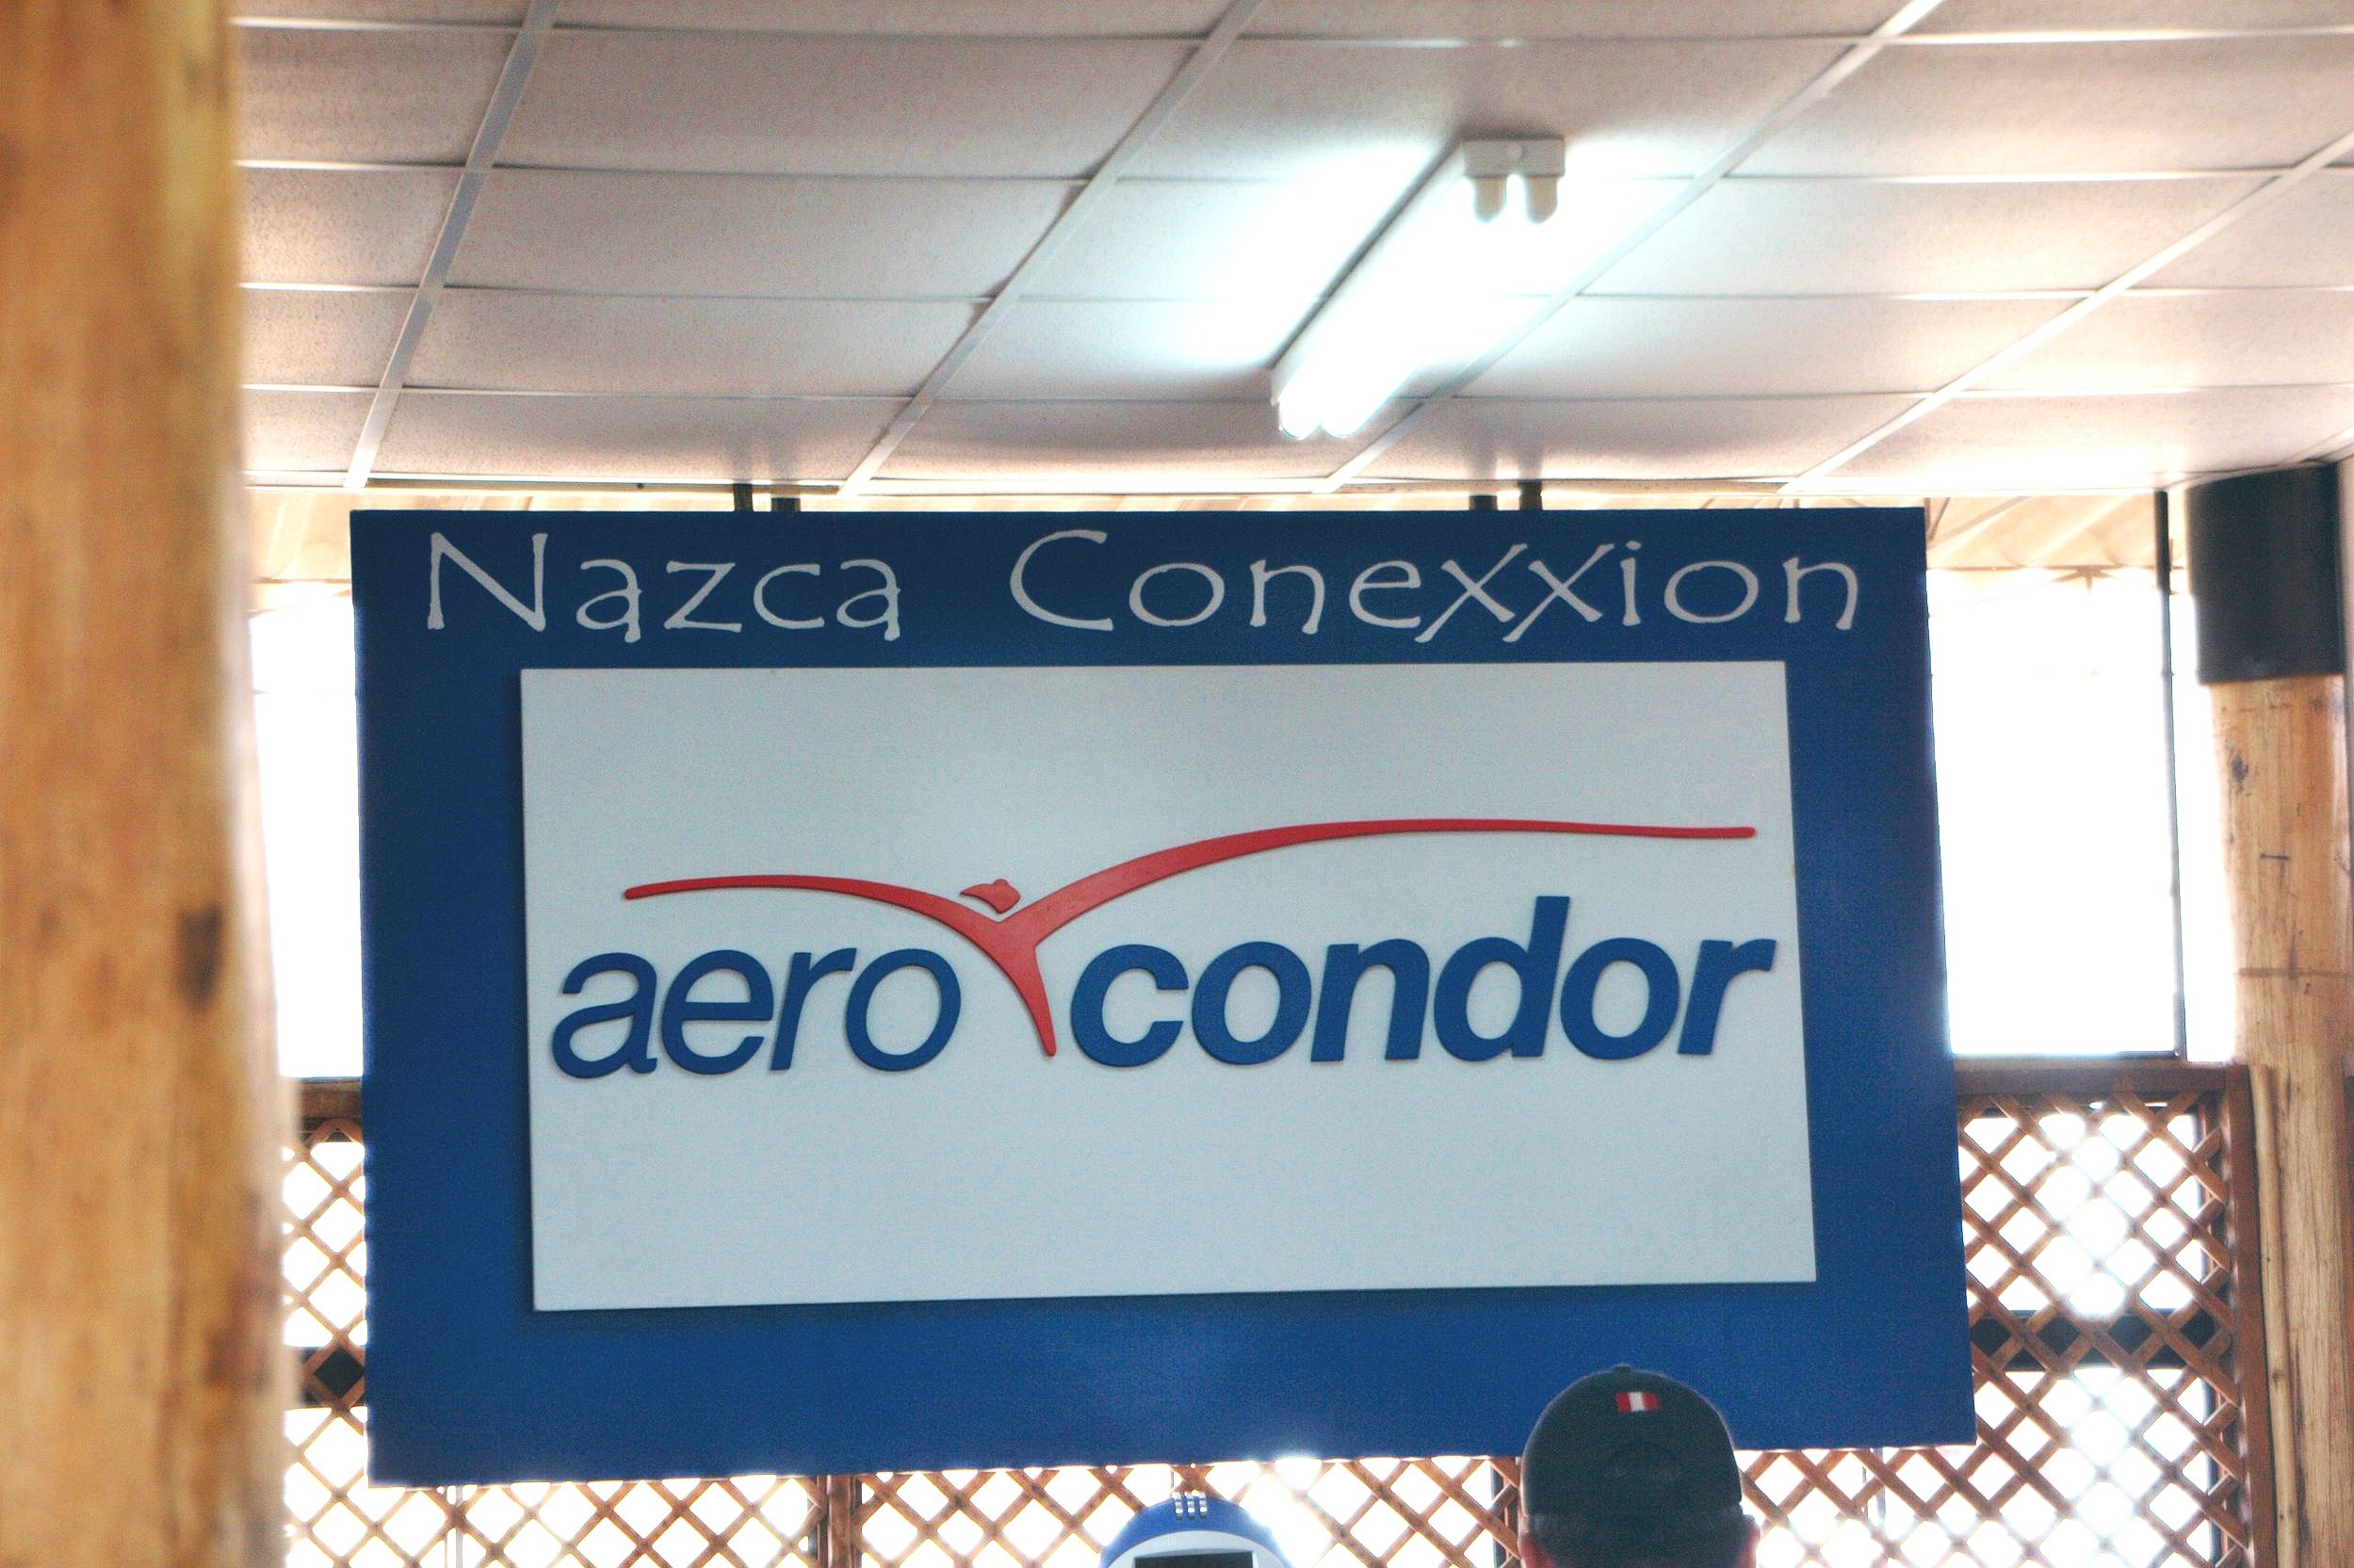  Aero Condor, the Nazca air tourism company.  Photo by  Christian Haugen , used under  CC BY 2.0    on Flickr. 